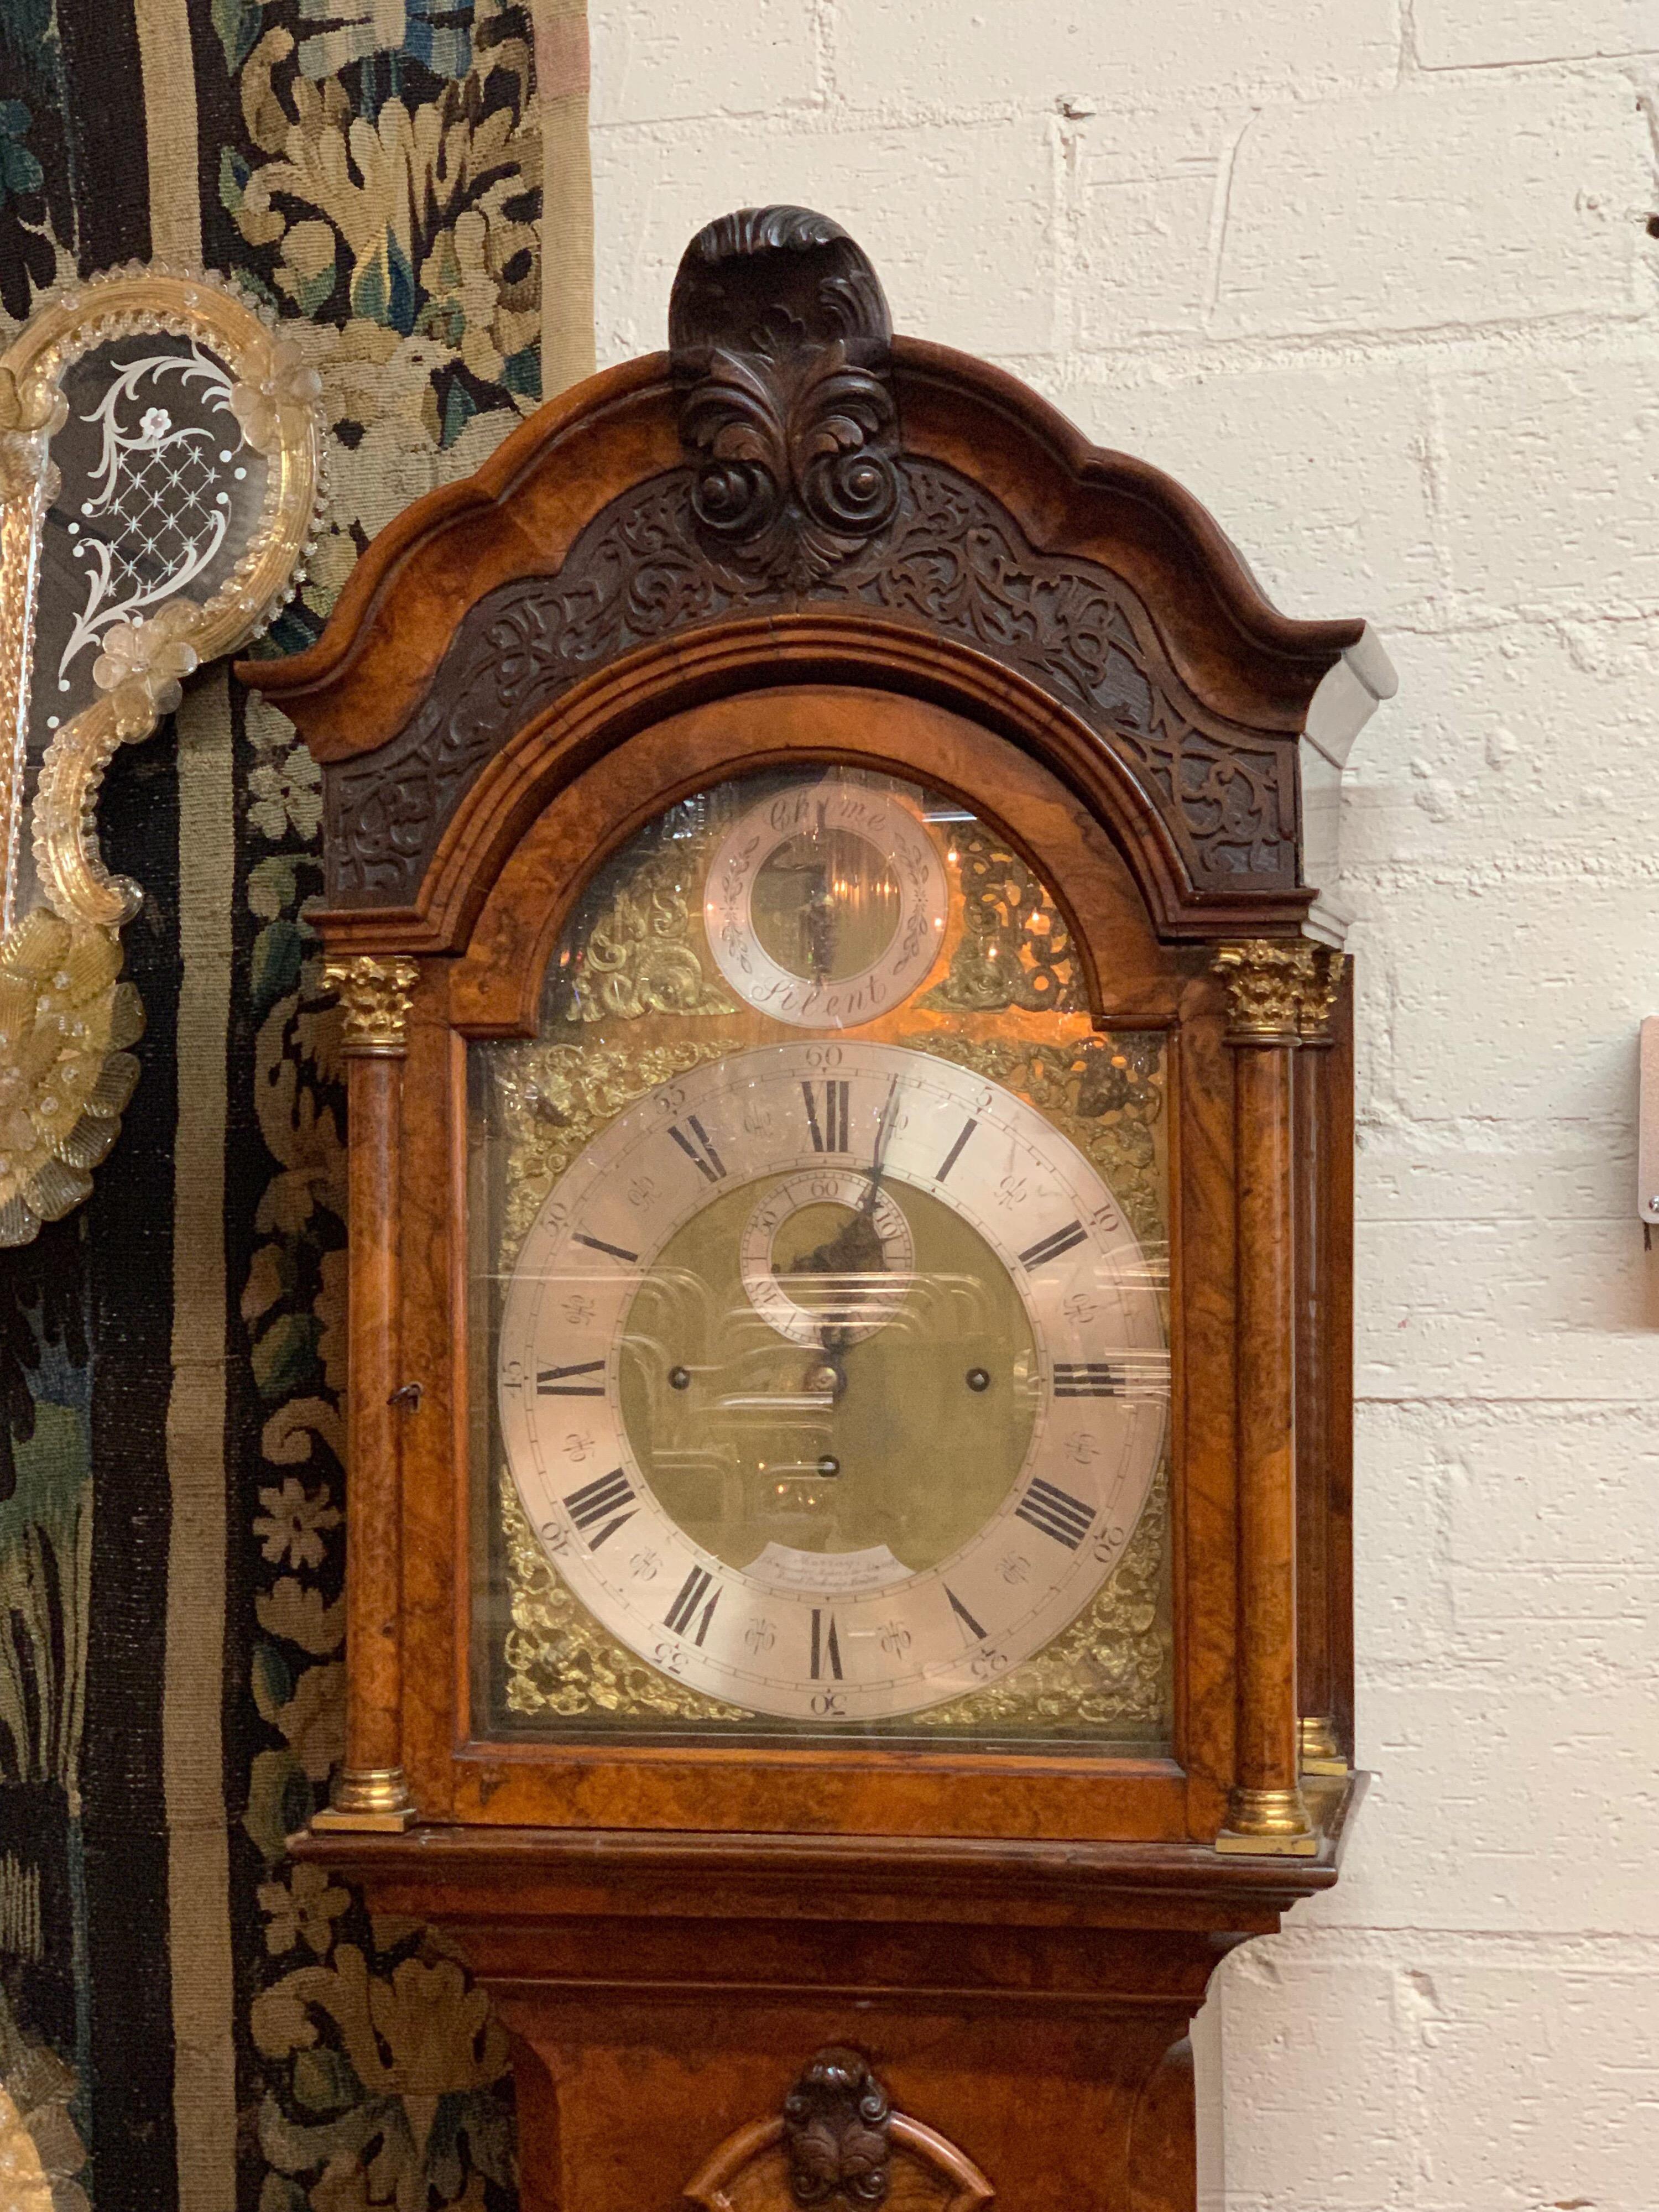 Handsome 19th century English burl walnut inlaid grandfather clock with important movement by Murray, London. This clock has inlays of burl wood and wood carvings at the top and sides of the clock. The face of the clock has beautiful gilt brass